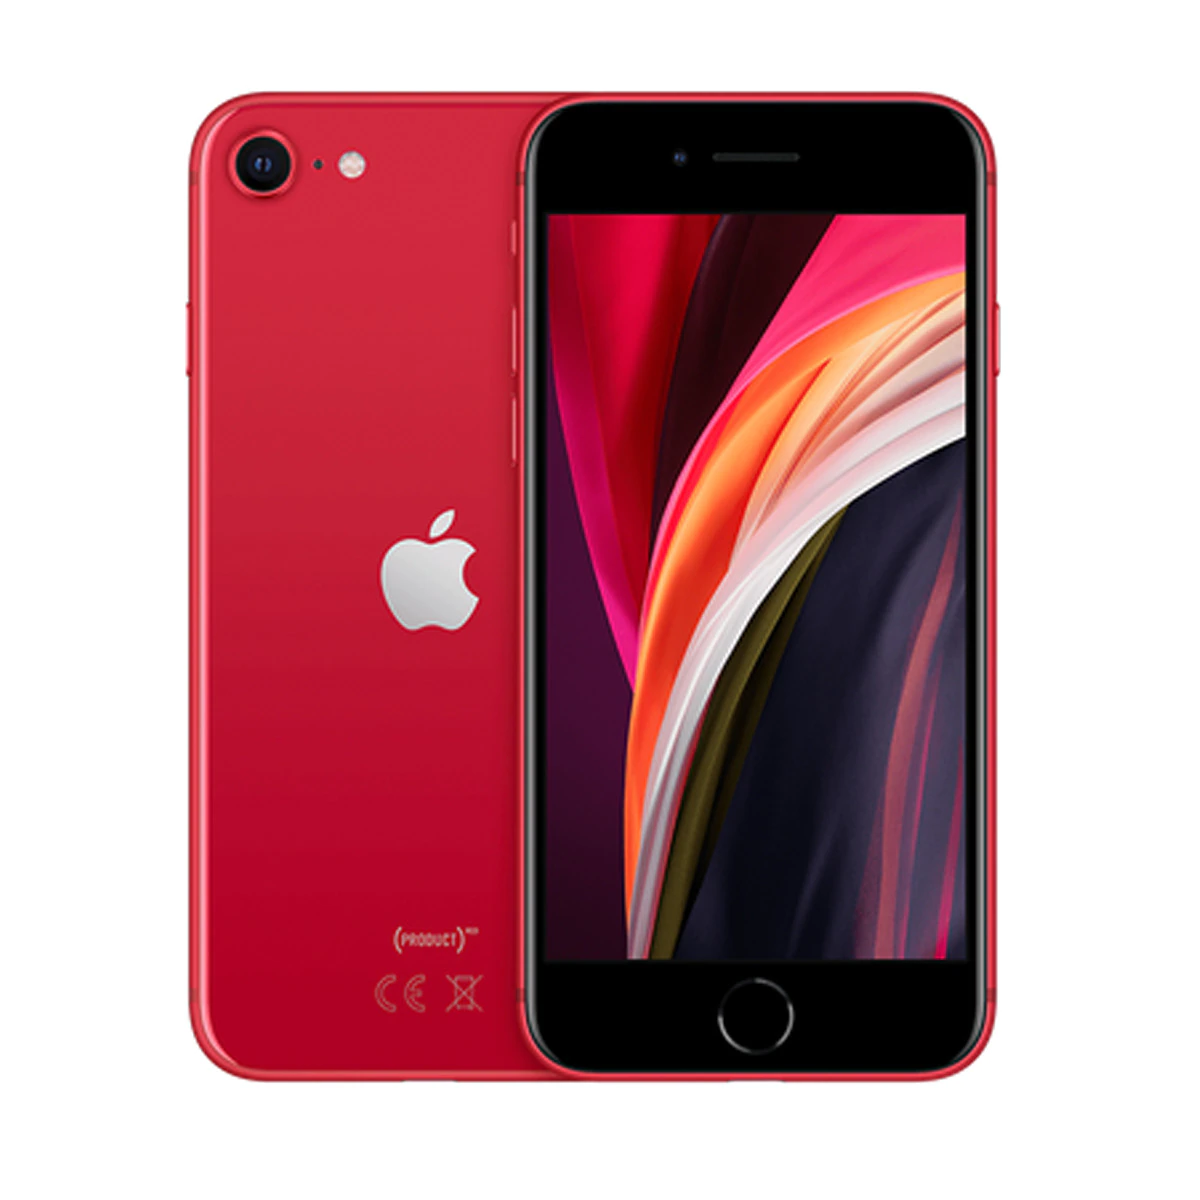 Apple iPhone SE (2020) 64GB PRODUCT(RED) Sin Accesorios móvil libre